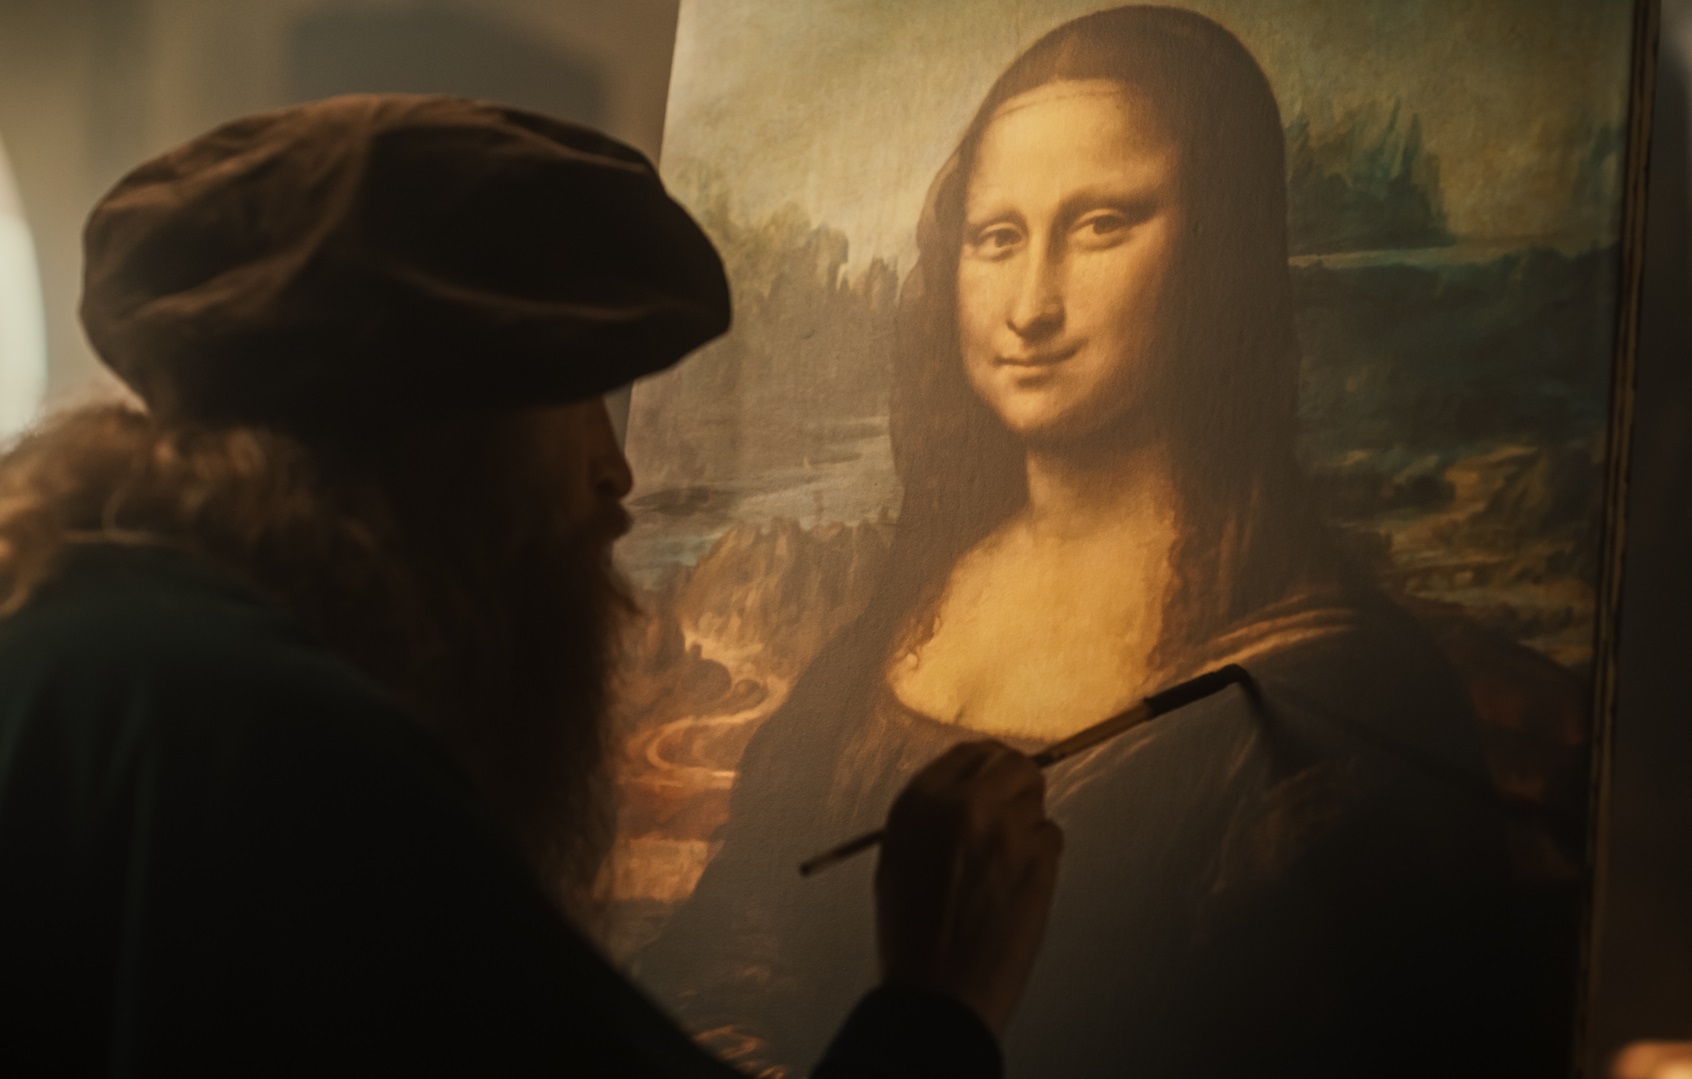 <p><strong>Location:</strong> The Louvre, France</p>  <p>The<em> Mona Lisa</em> by Leonardo DaVinci is considered the most famous painting in the world—and it can be found in The Louvre in Paris, France.</p>